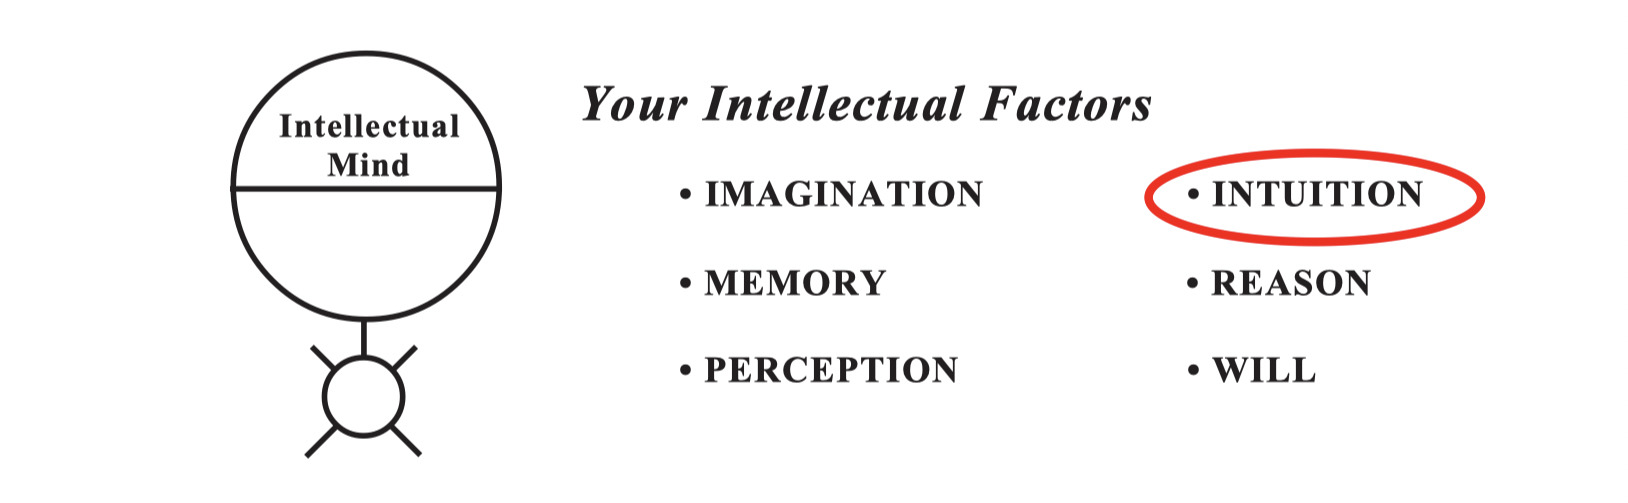 What Is Intuition: Your Intellectual Factors